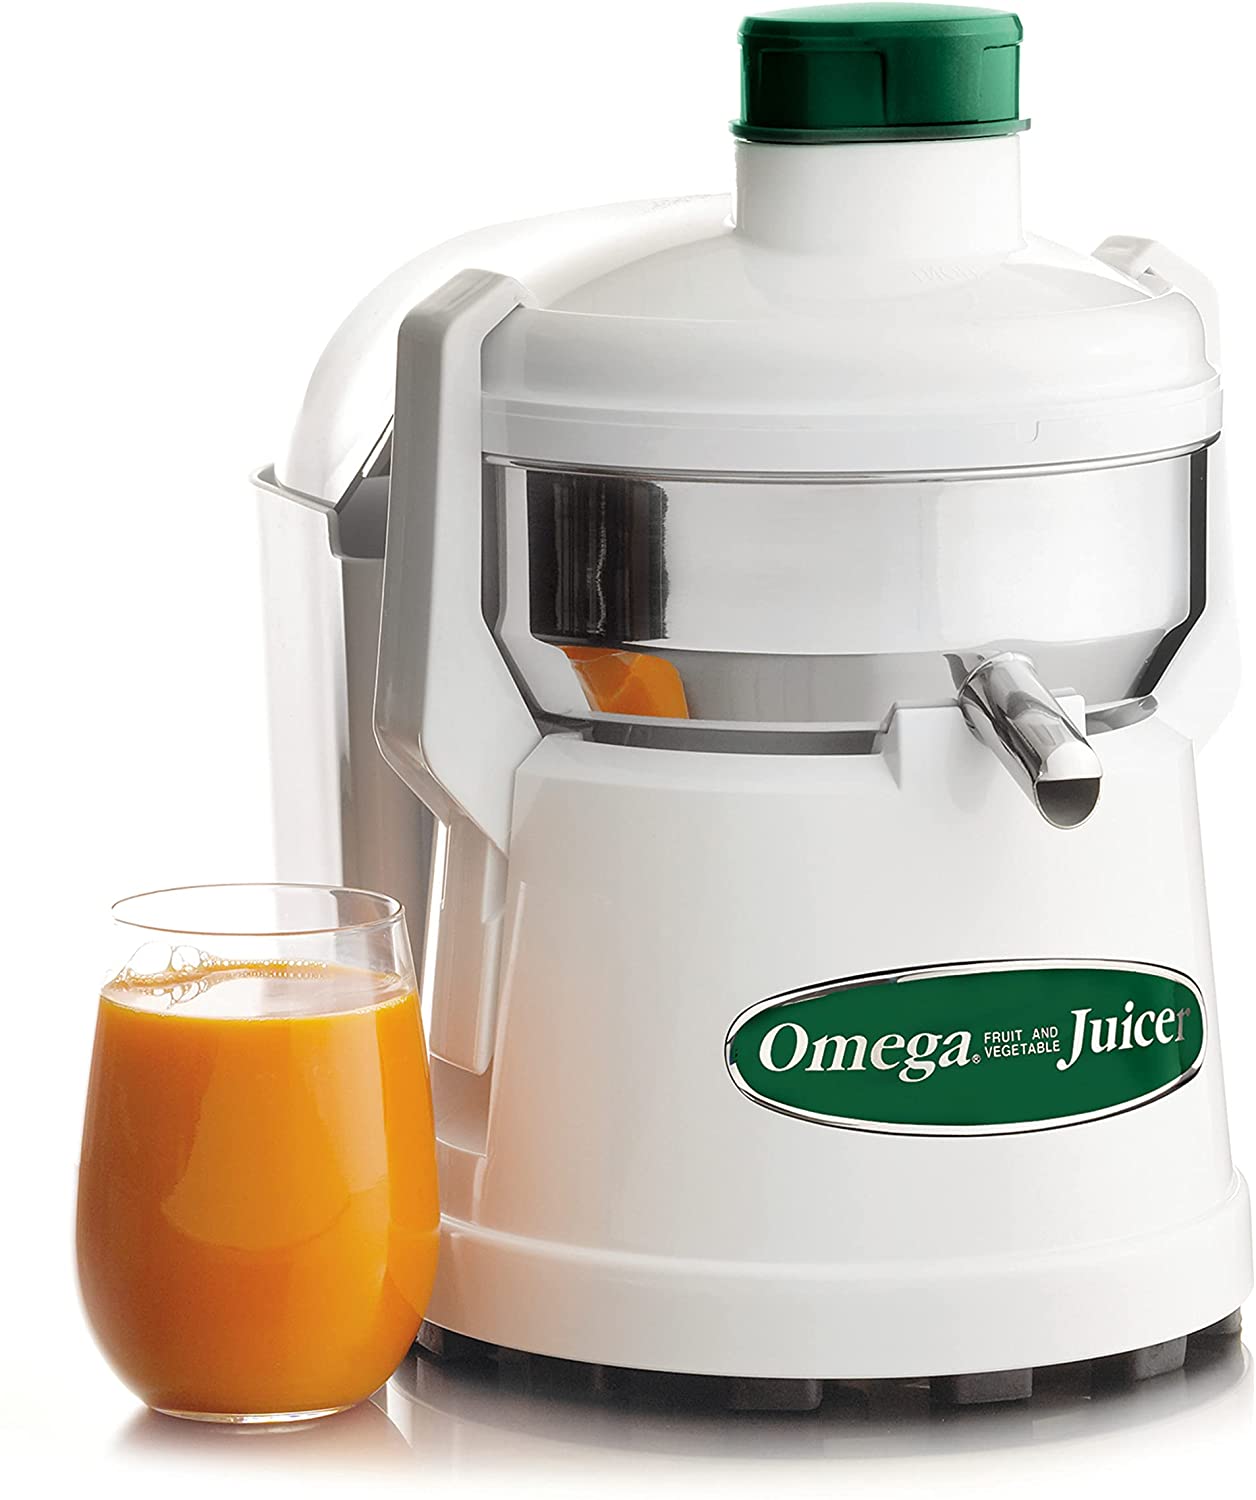 Omega J4000 High-Speed Automatic Pulp Ejection Juicer